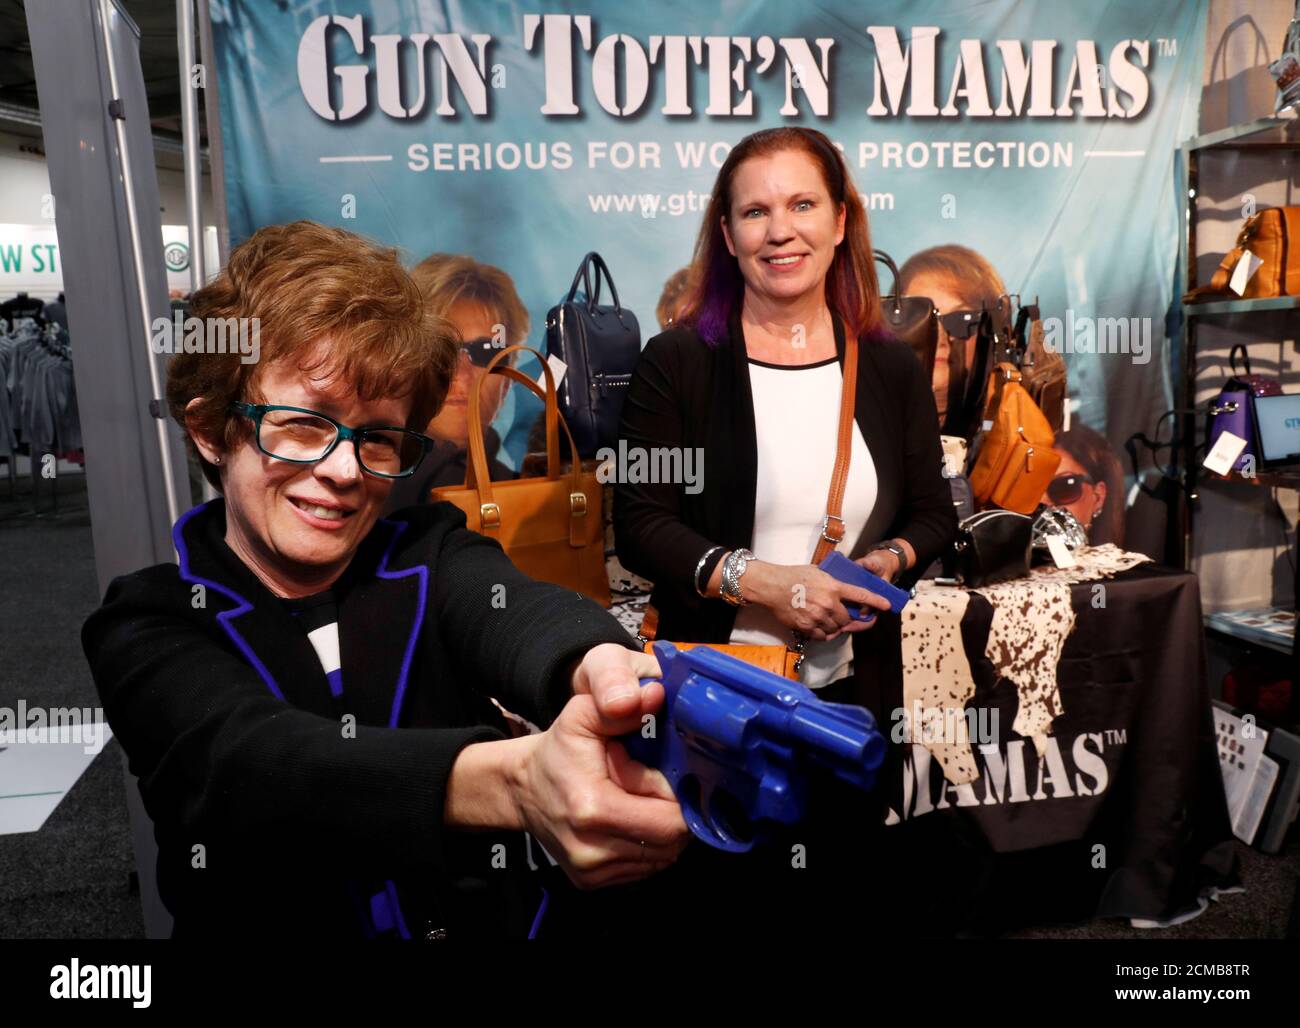 Claudia Chisholm, CEO of Gun Tote'n Mamas, and Carrie Lightfoot, founder of The Well Armed Woman, pose in the Gun Tote'n Mamas booth during the SHOT (Shooting, Hunting, Outdoor Trade) Show in Las Vegas, Nevada, U.S., January 22, 2019. Picture taken January 22, 2019. REUTERS/Steve Marcus Stock Photo